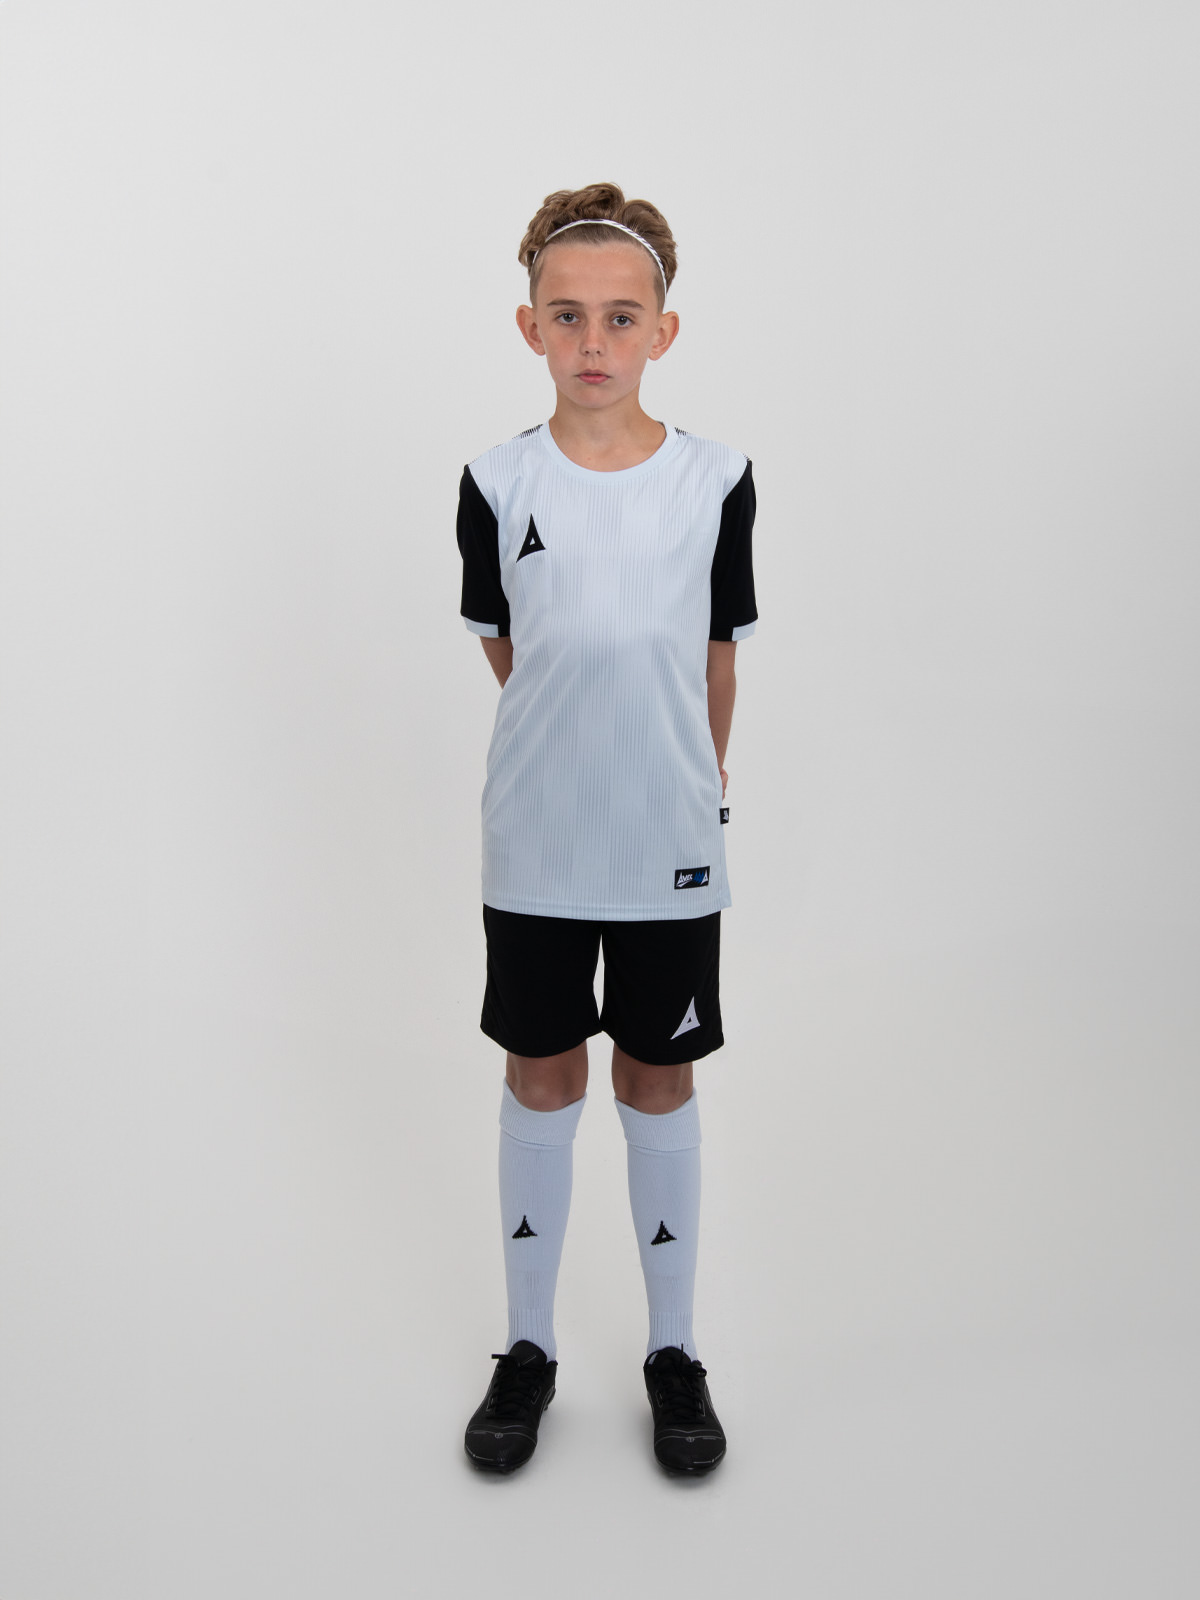 a grey football shirt with black shorts and grey socks makes a winning combination for any kids football team.